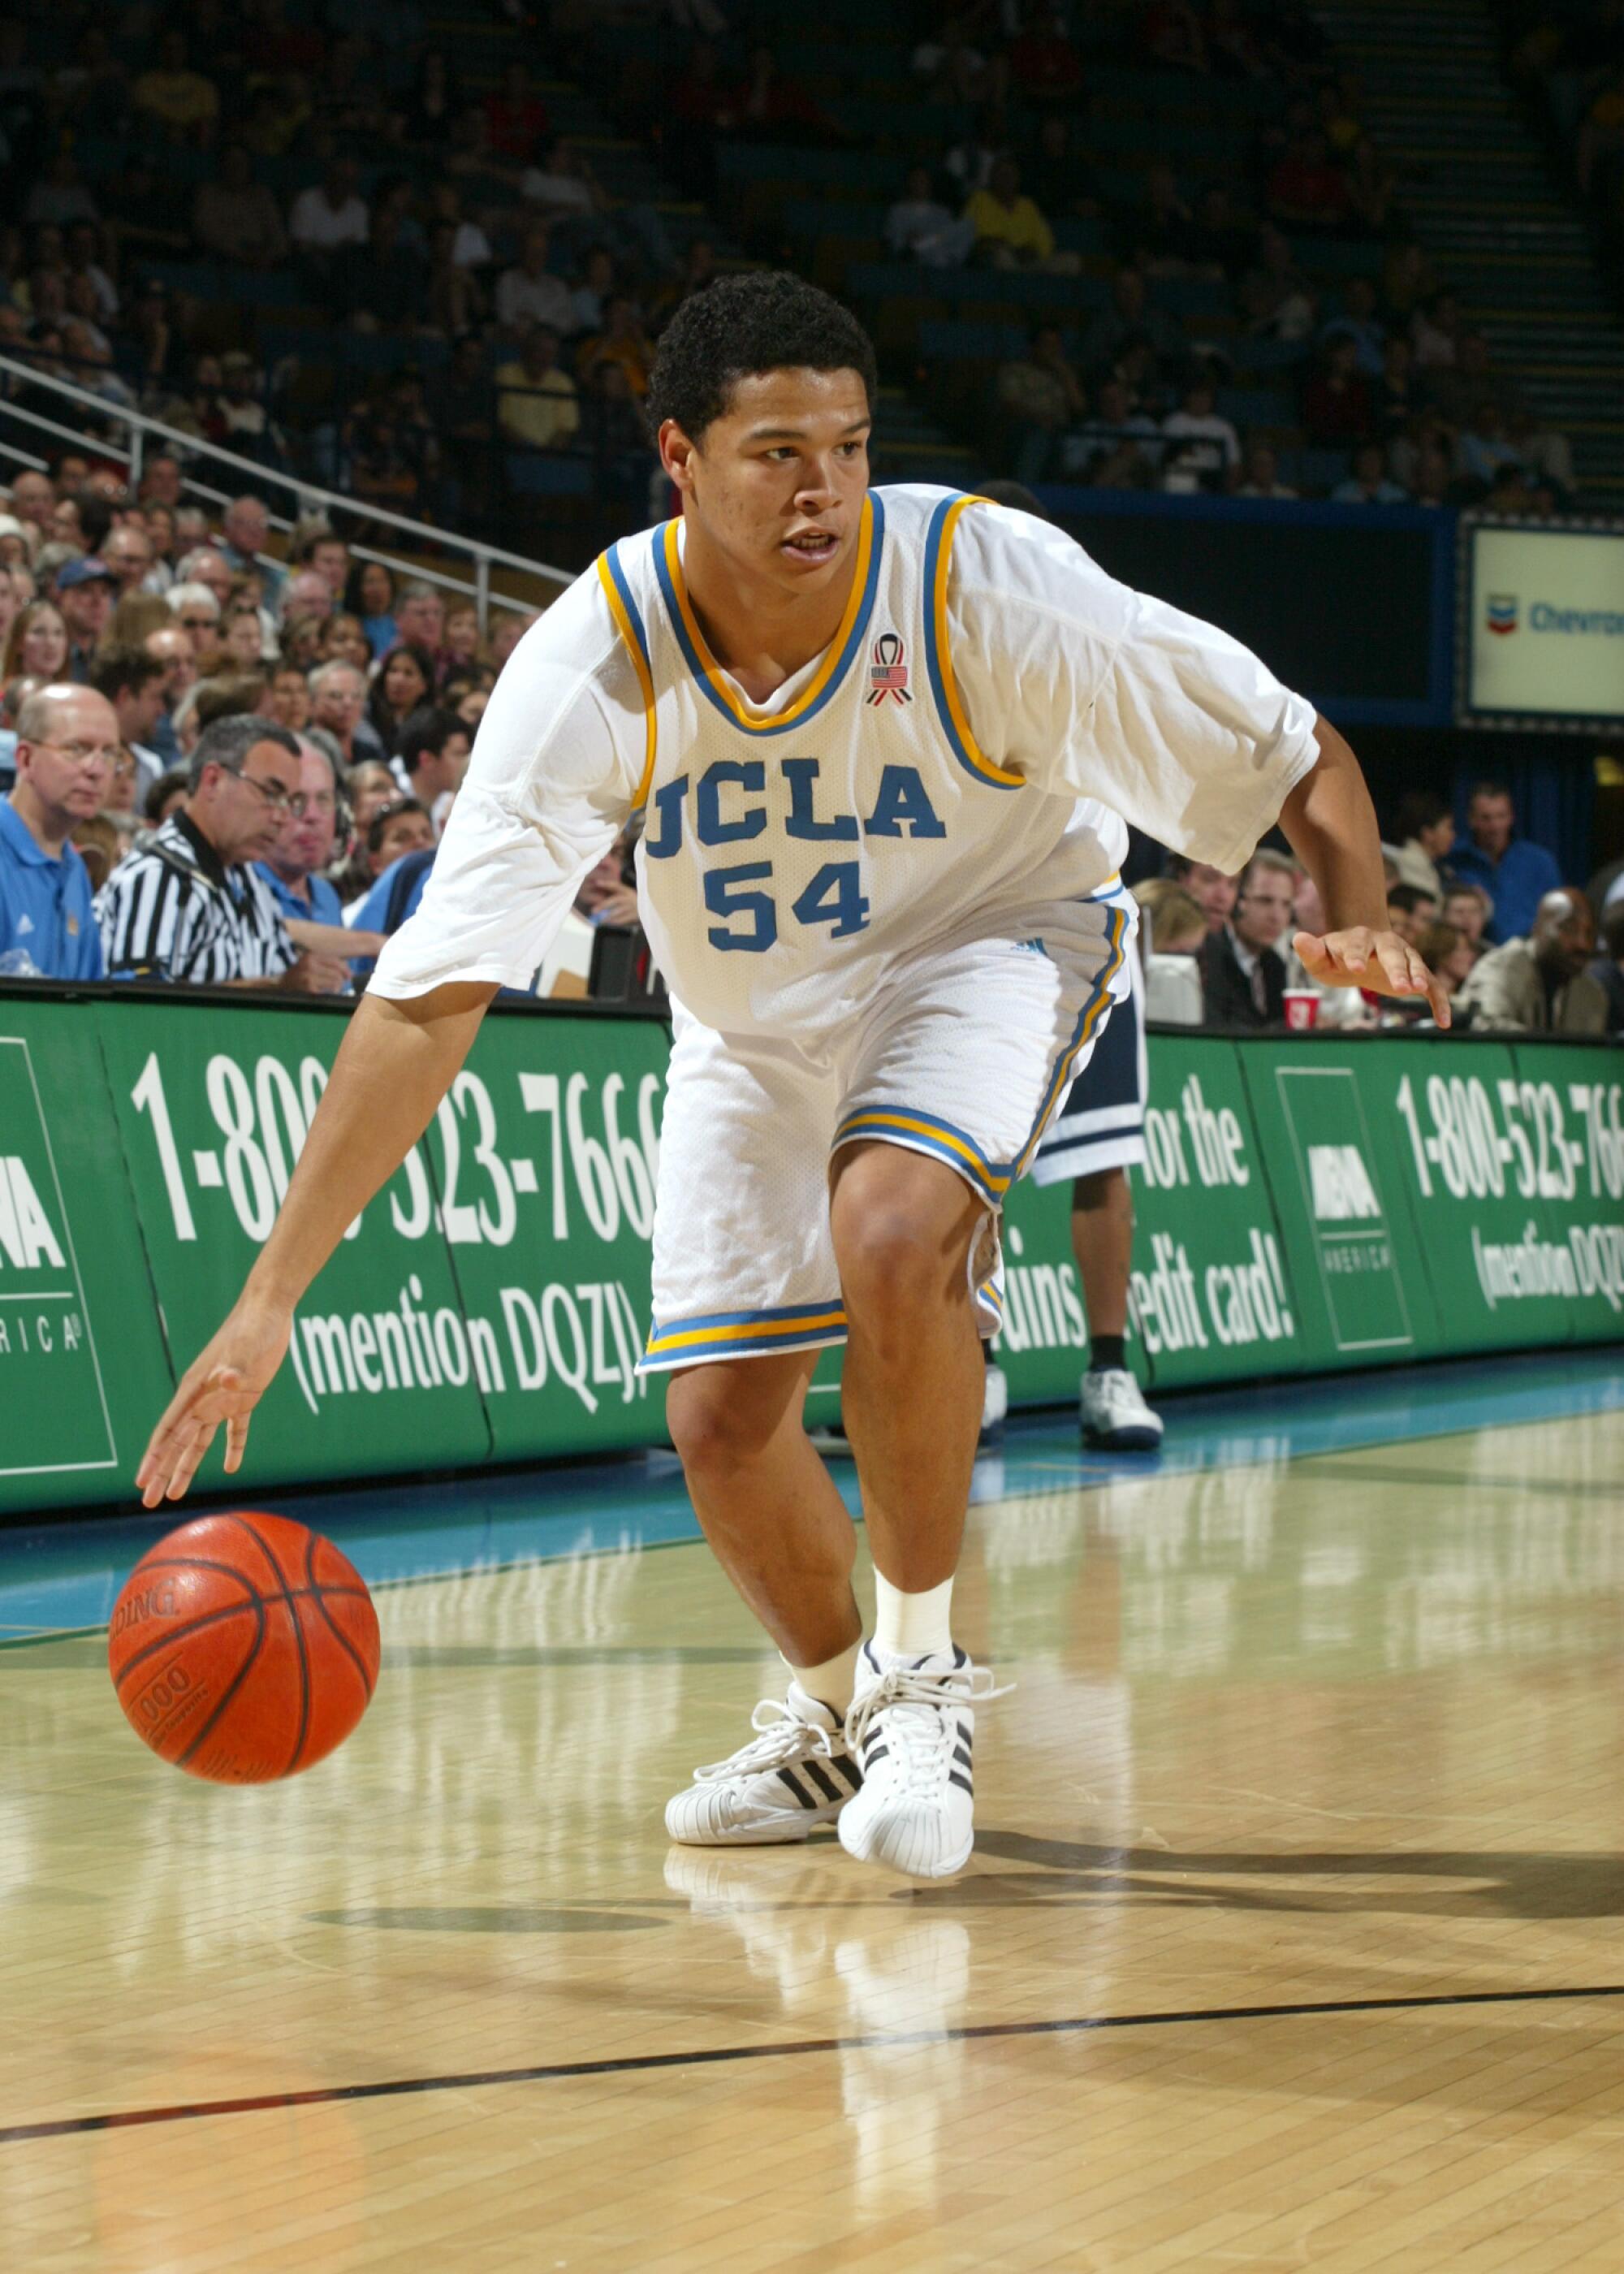 Josiah Johnson played at UCLA from 2001 to 2005 averaging 1.3 points in 7.3 minutes per game throughout his career.